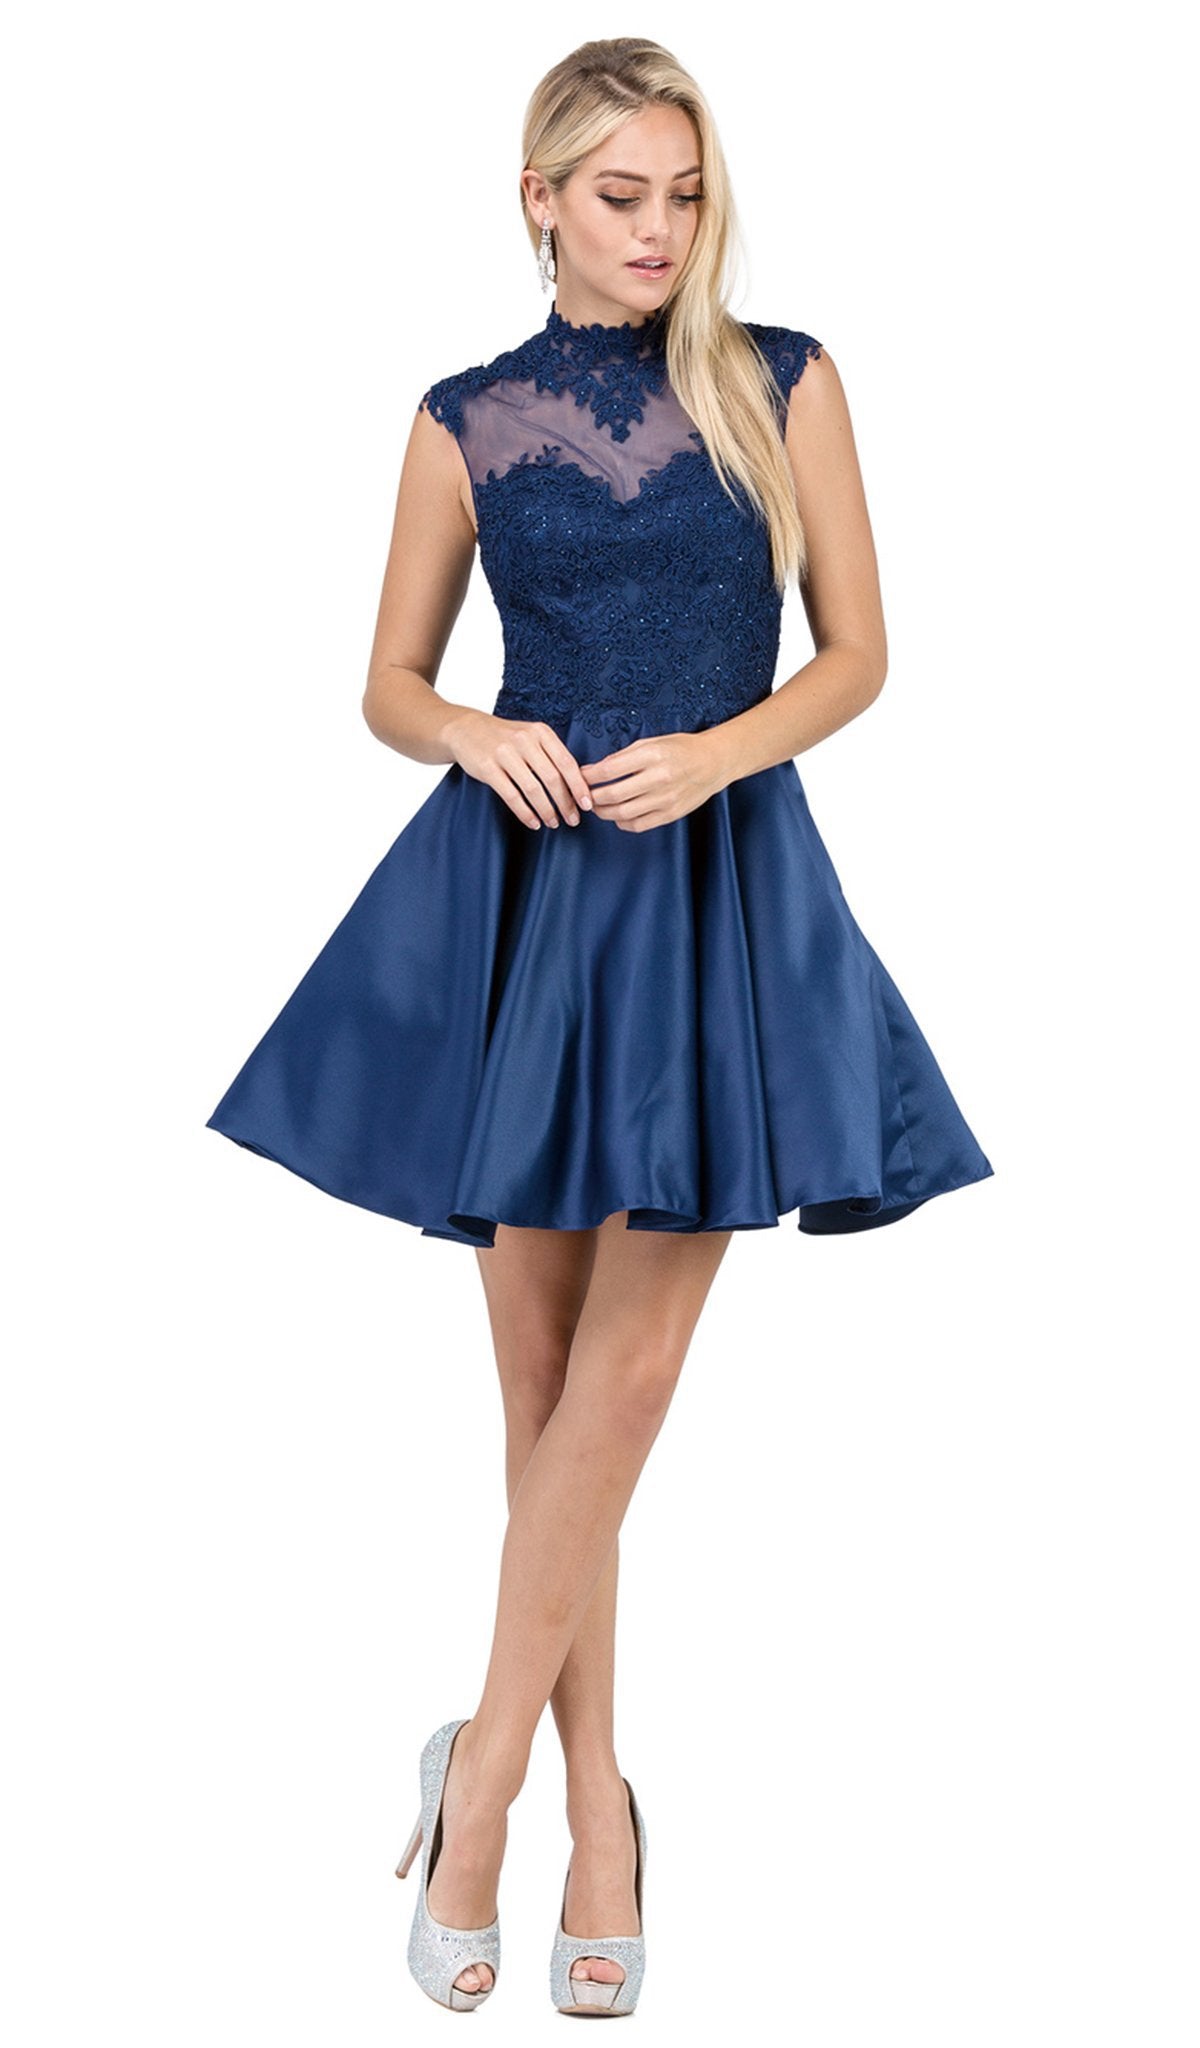 Dancing Queen - 3069 Appliqued Illusion High Neck Homecoming Dress in Blue